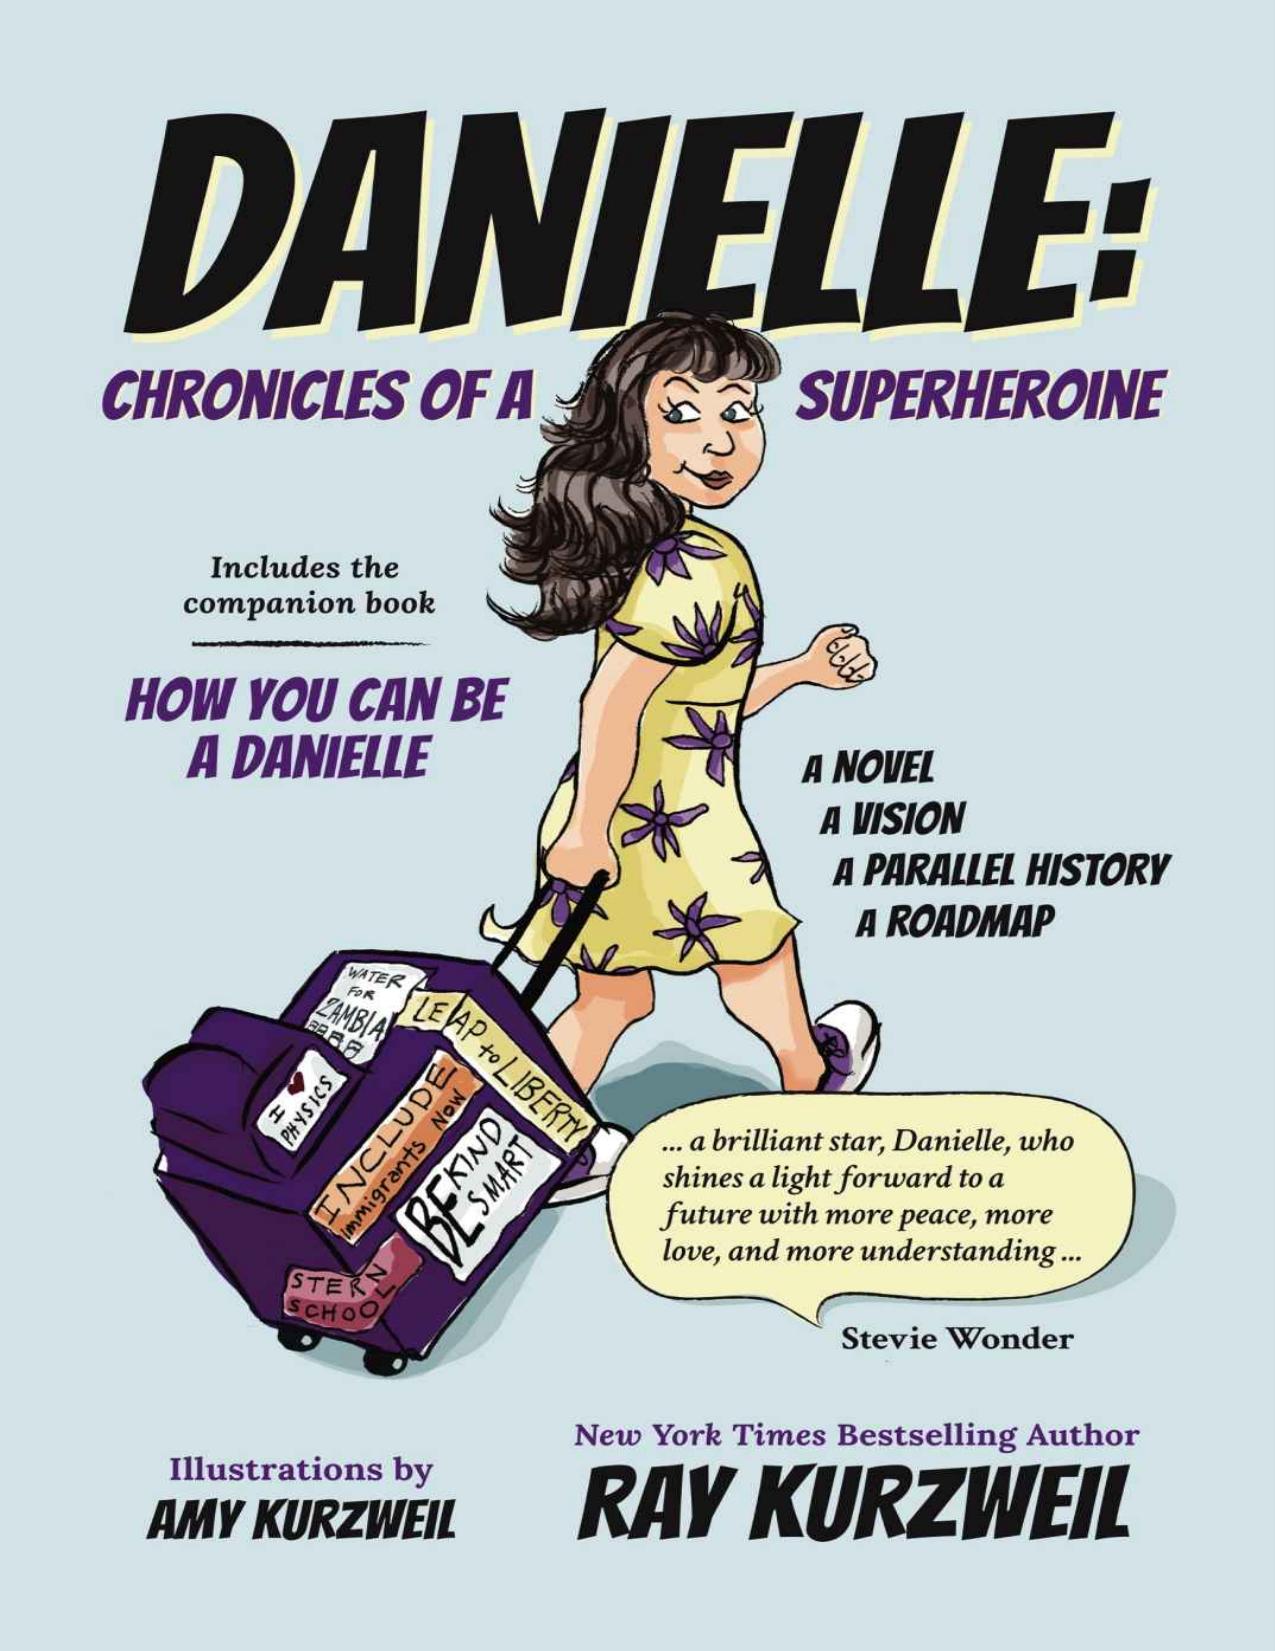 Danielle: Chronicles of a Superheroine Complete Edition by Ray Kurzweil